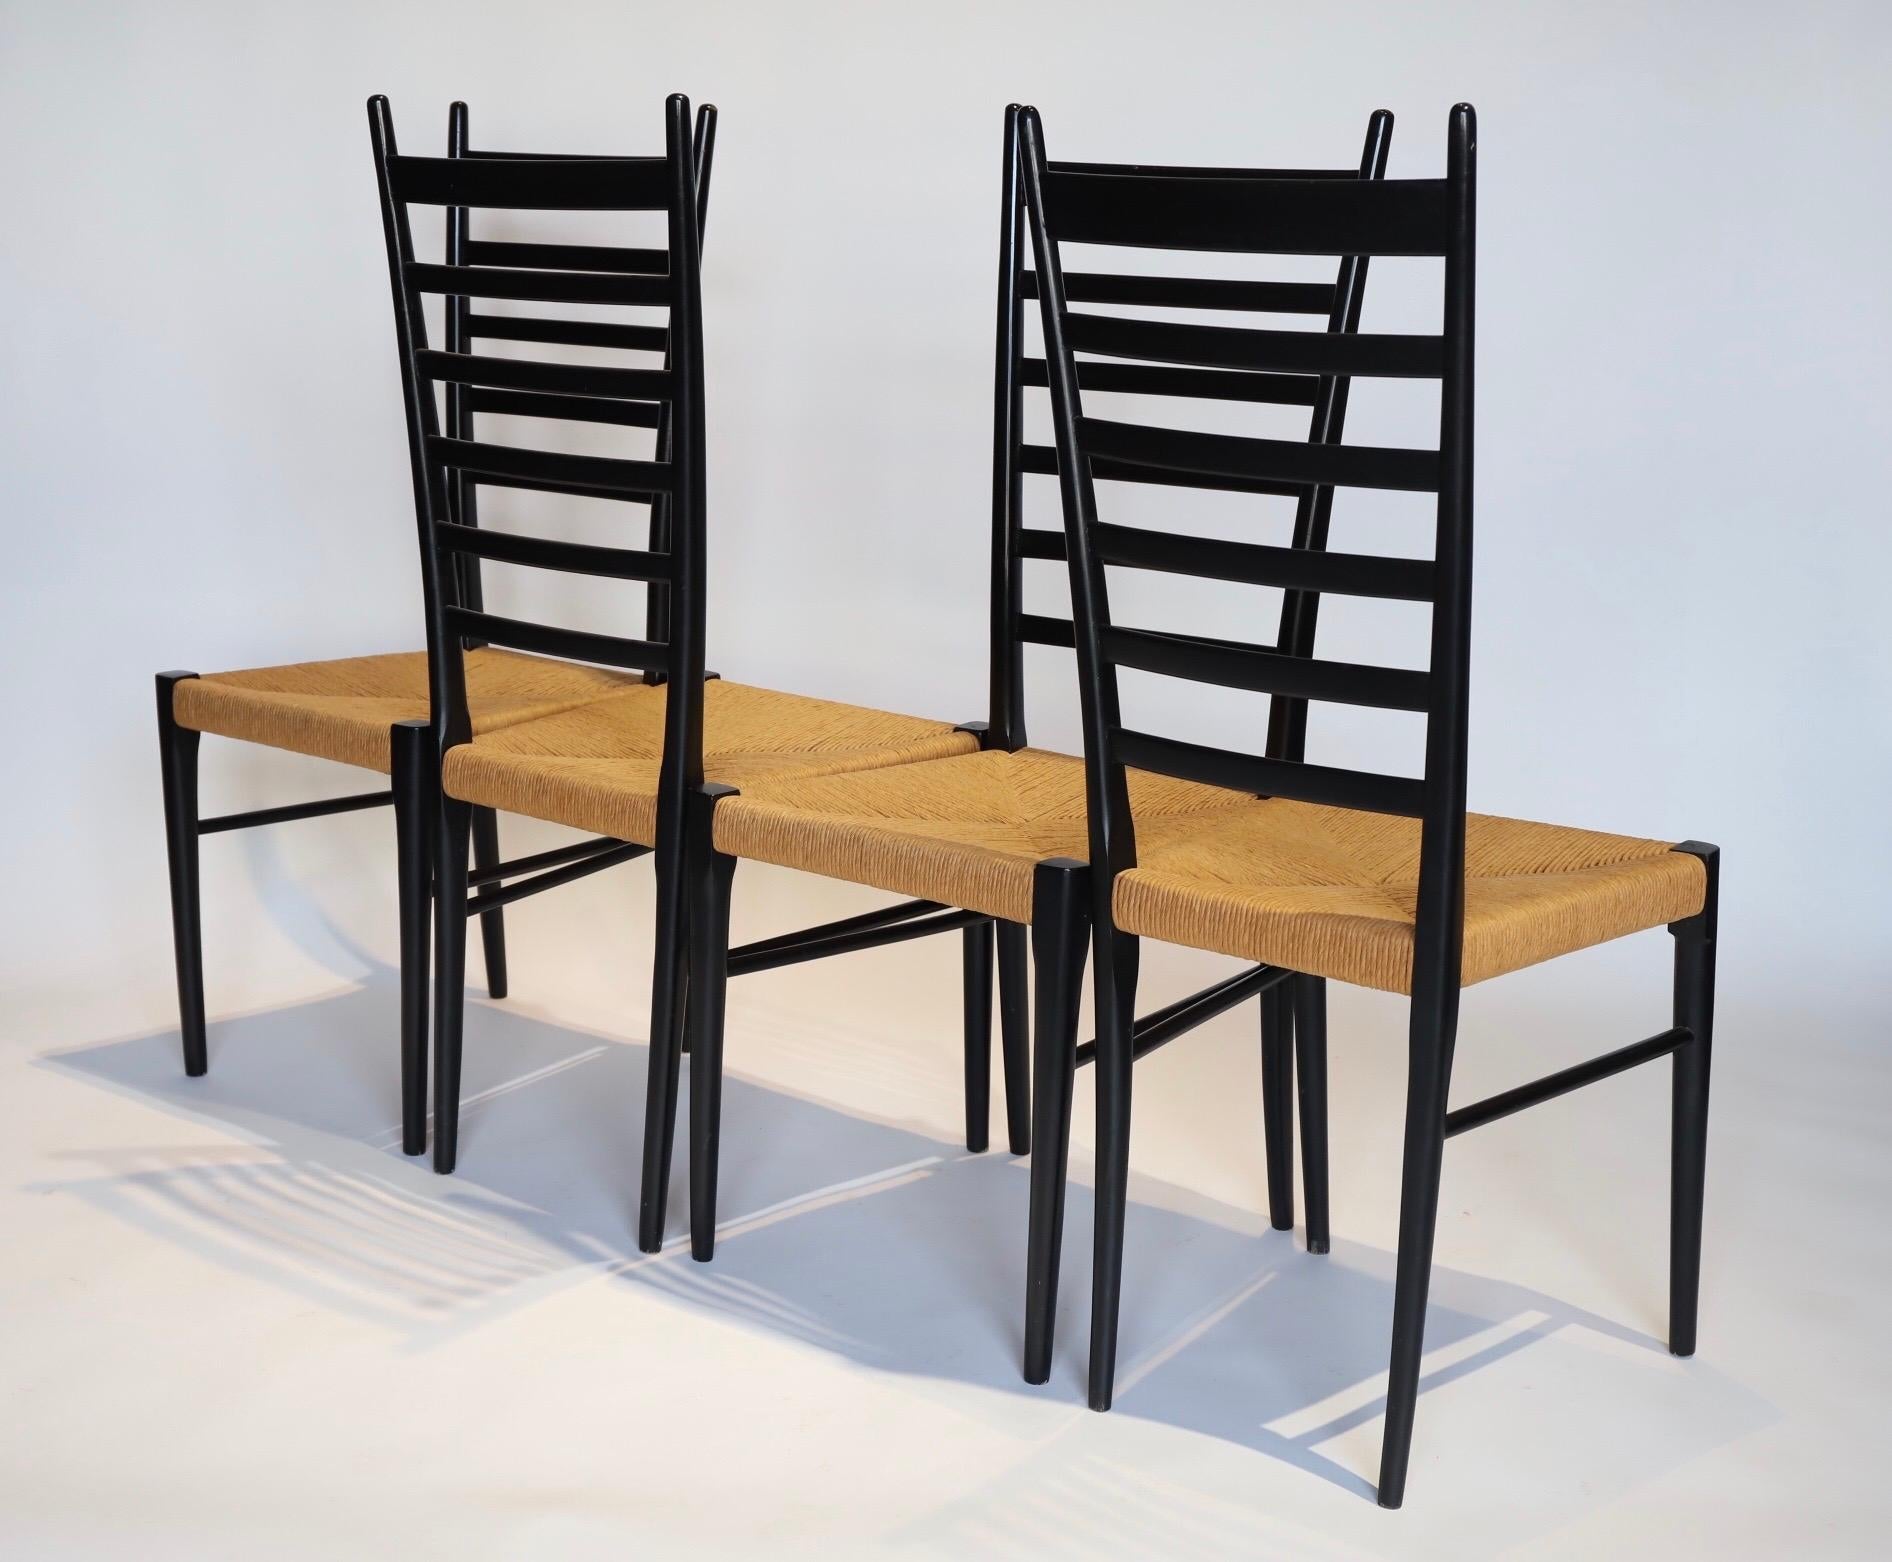 Stunning set of 4 black ladder back dining chairs with jute seats in the style of Gio Ponti, made in Italy. Photographed with Eames DCM for scale.